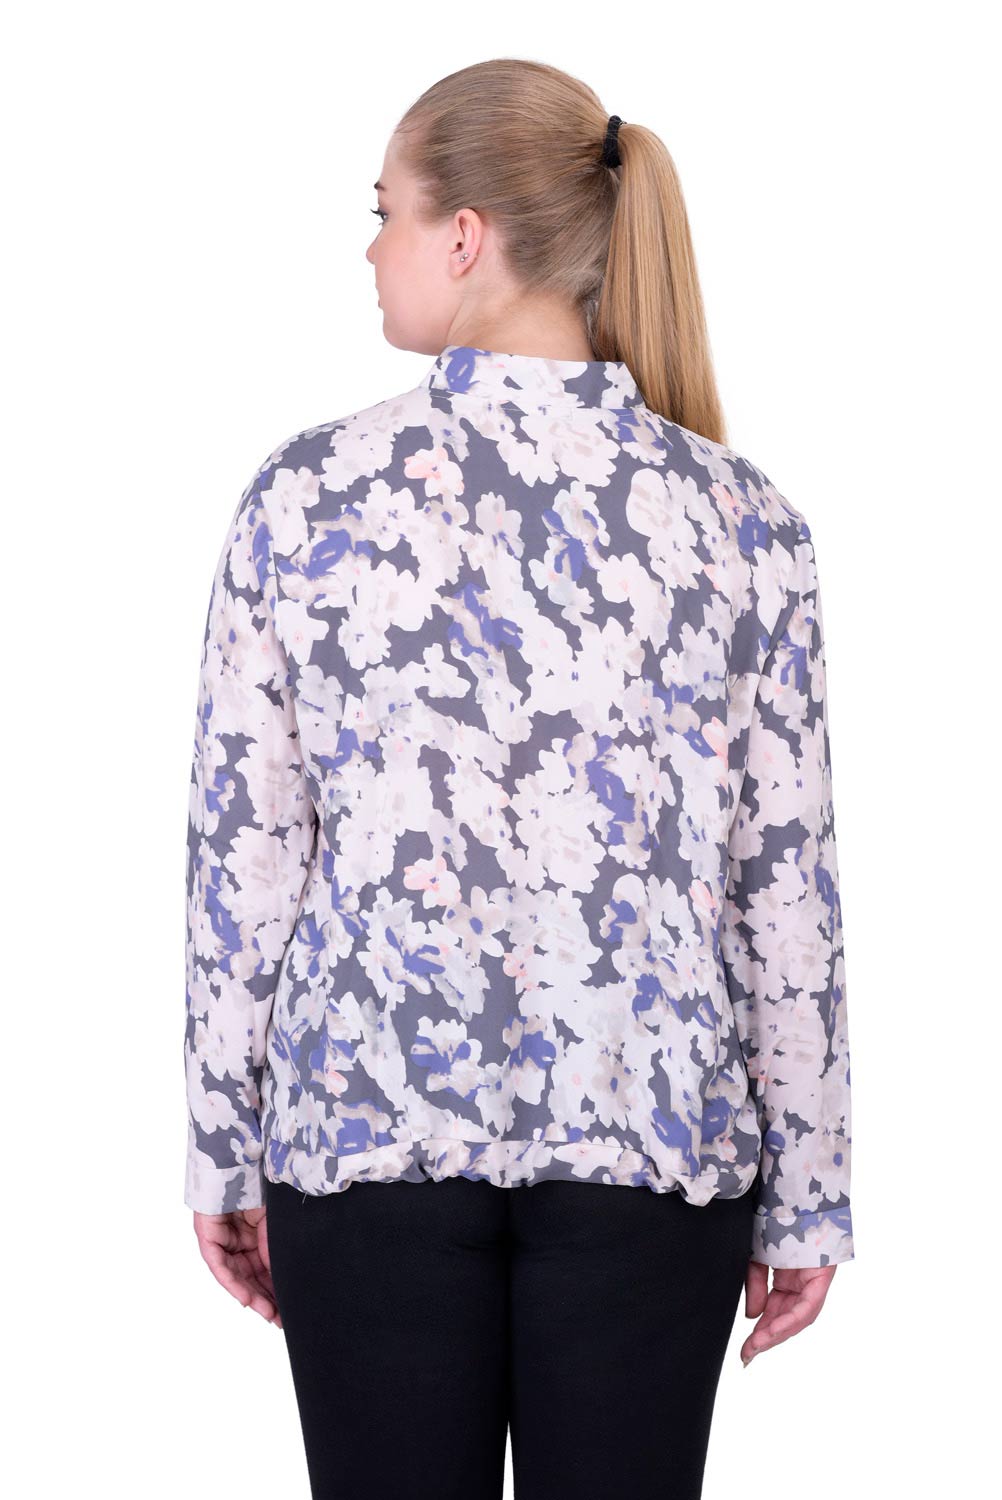 Wildflower Navy Blue Bomber Jacket, White and Blue Bomber Jacket, Women's  Botanical Bomber Jacket, White Floral Fleece Jacket for Women - Etsy